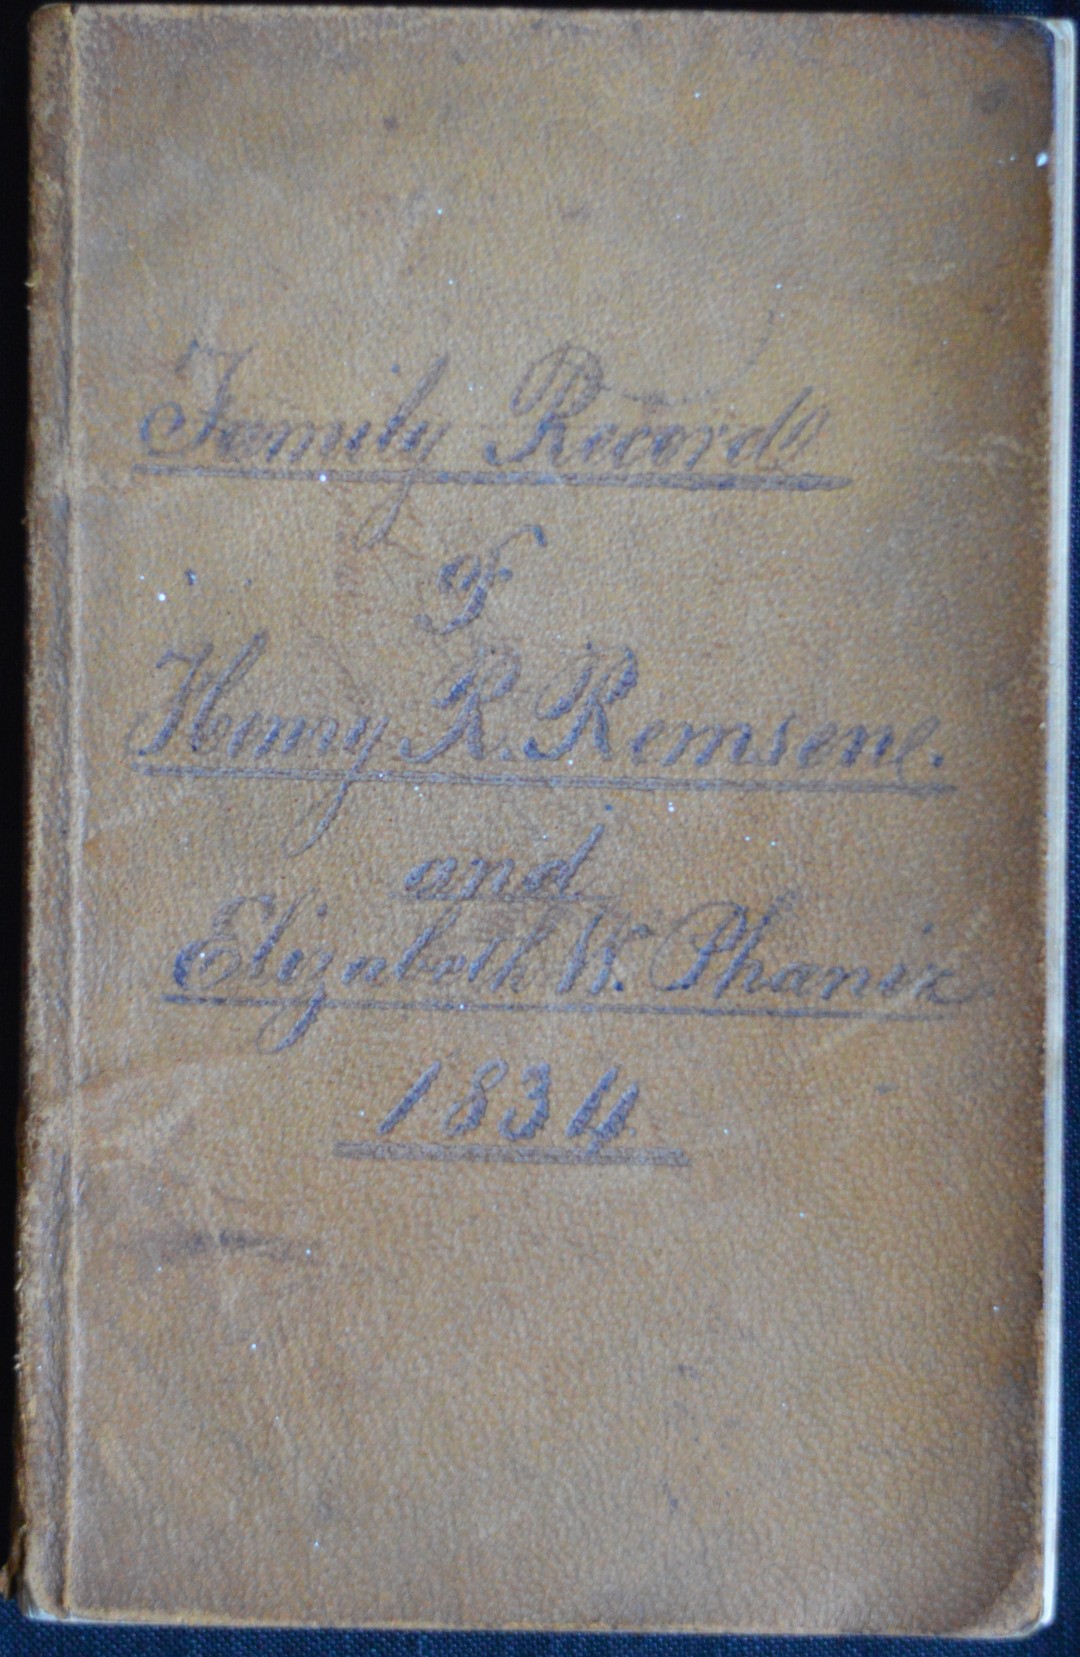 Remsen Family Records 1834 cover